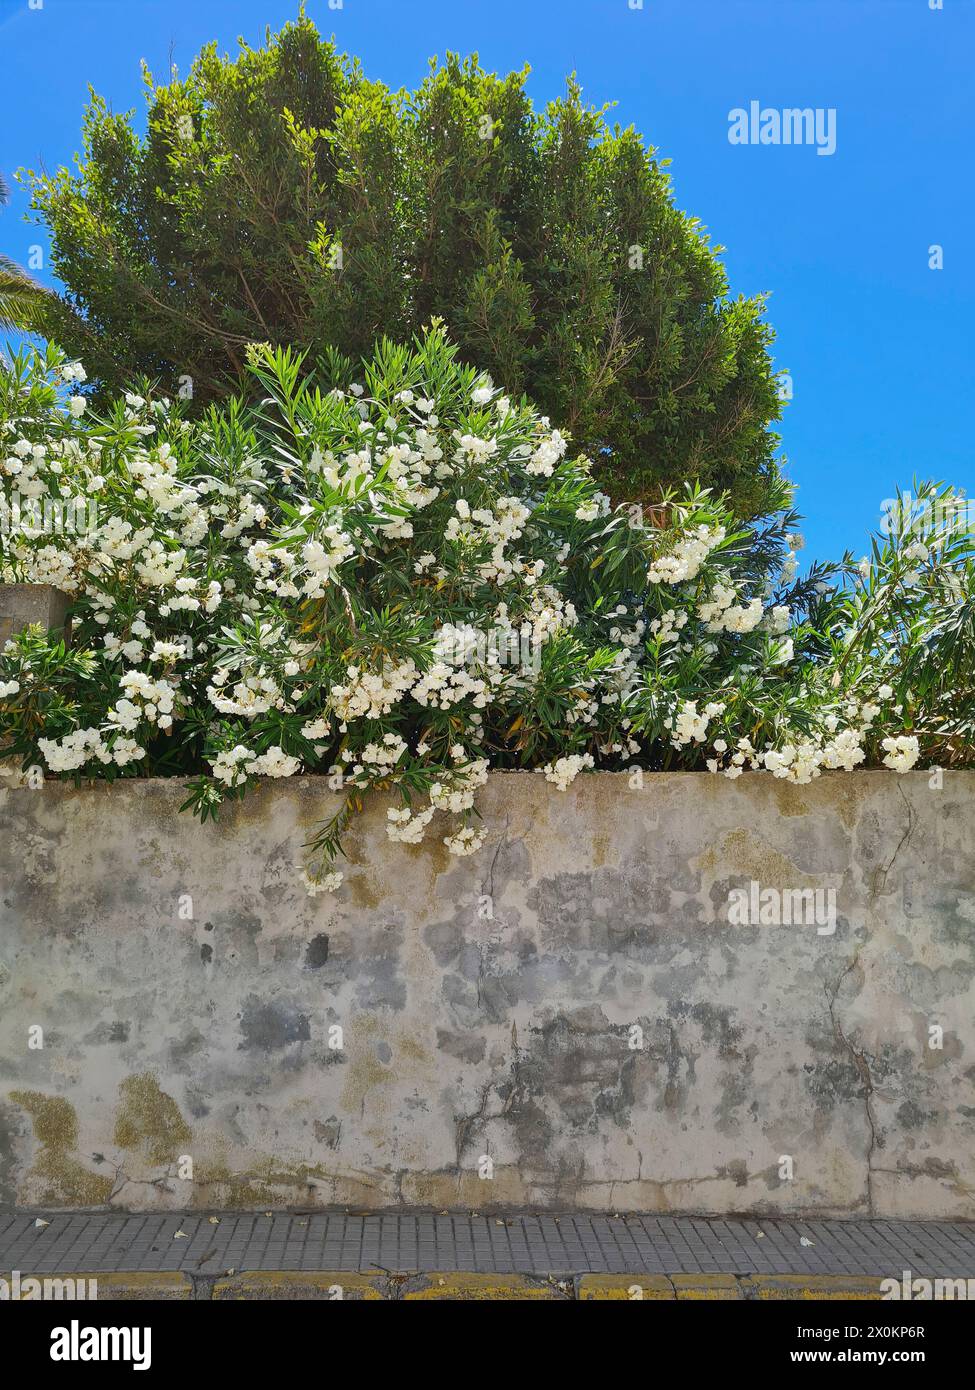 Street view of an old wall, behind which a beautiful garden with white flowering oleanders and green trees can be seen, Common Oleander, Nerium Oleander, Mallorca, Spain Stock Photo